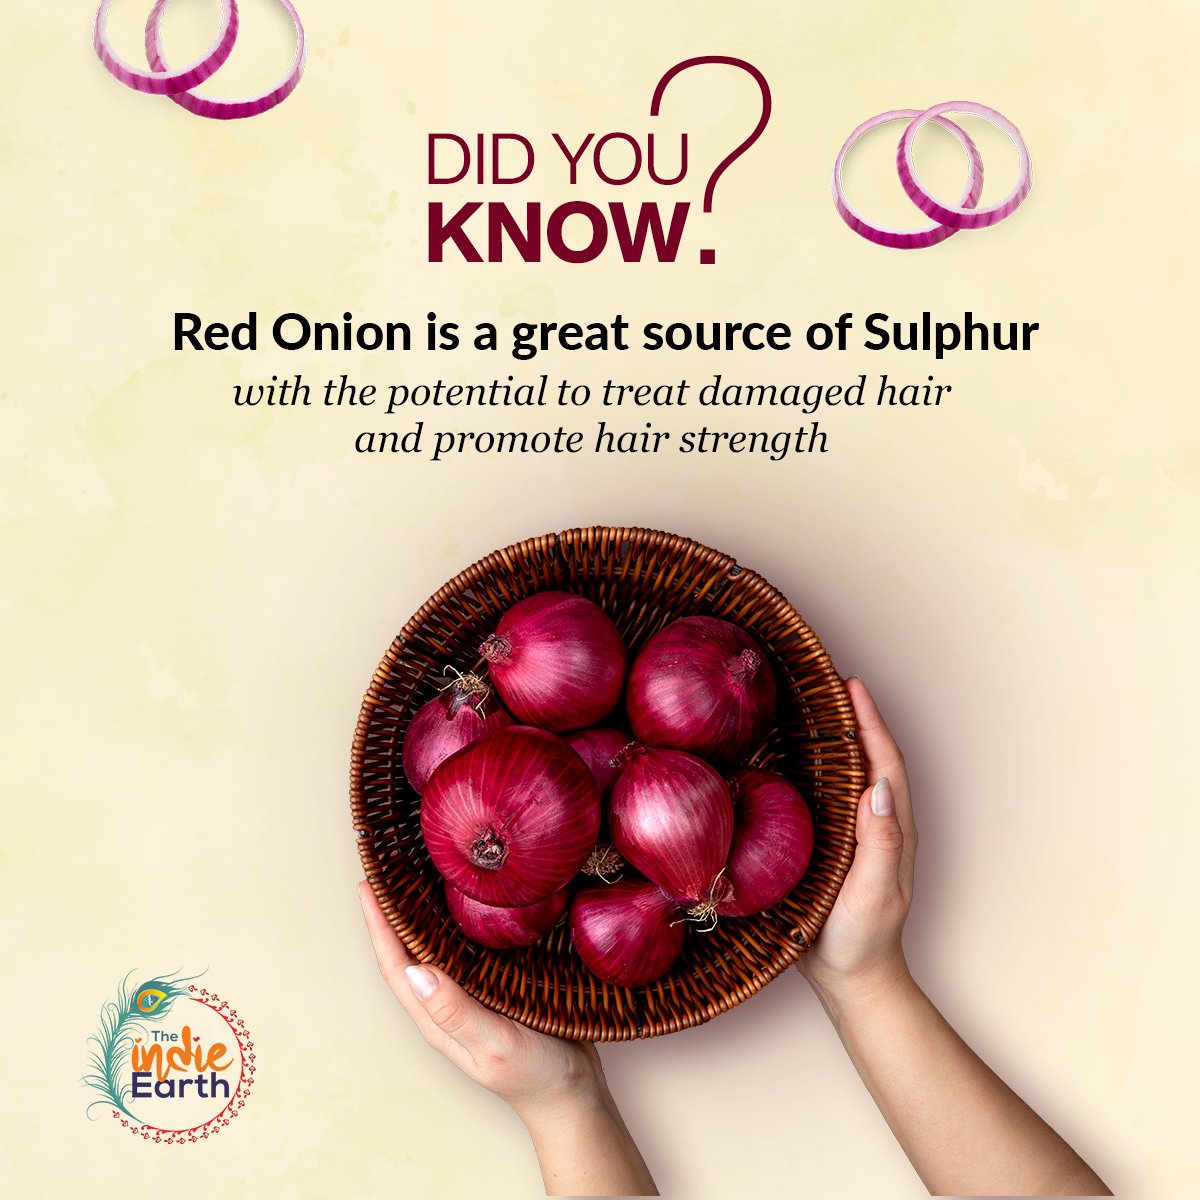 🤔DID YOU KNOW ?
Red Onion🧅 is a great source of Sulphur 💆‍♀️ with the potential to treat damaged hair and promote hair strength.
theindieearth.in
#theindieearth #redonionoil #redonionshampoo  #sulphurboost #onionmagic #strongerhair #naturalremedy #herbal #wecareforyou